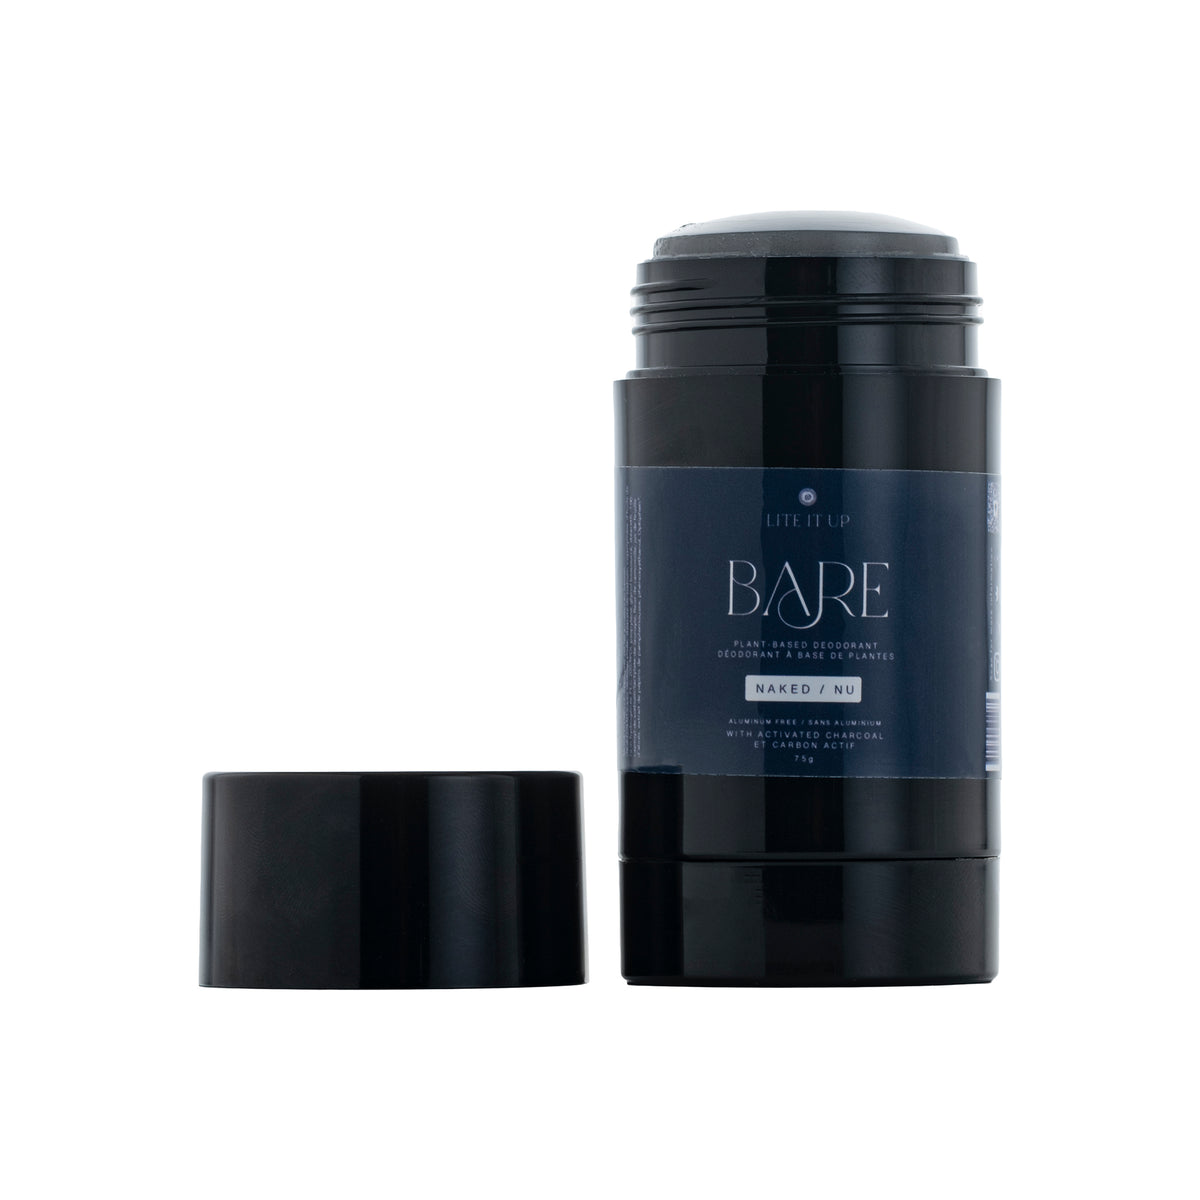 BARE Plant Based Deodorant - NAKED w/Activated Charcoal